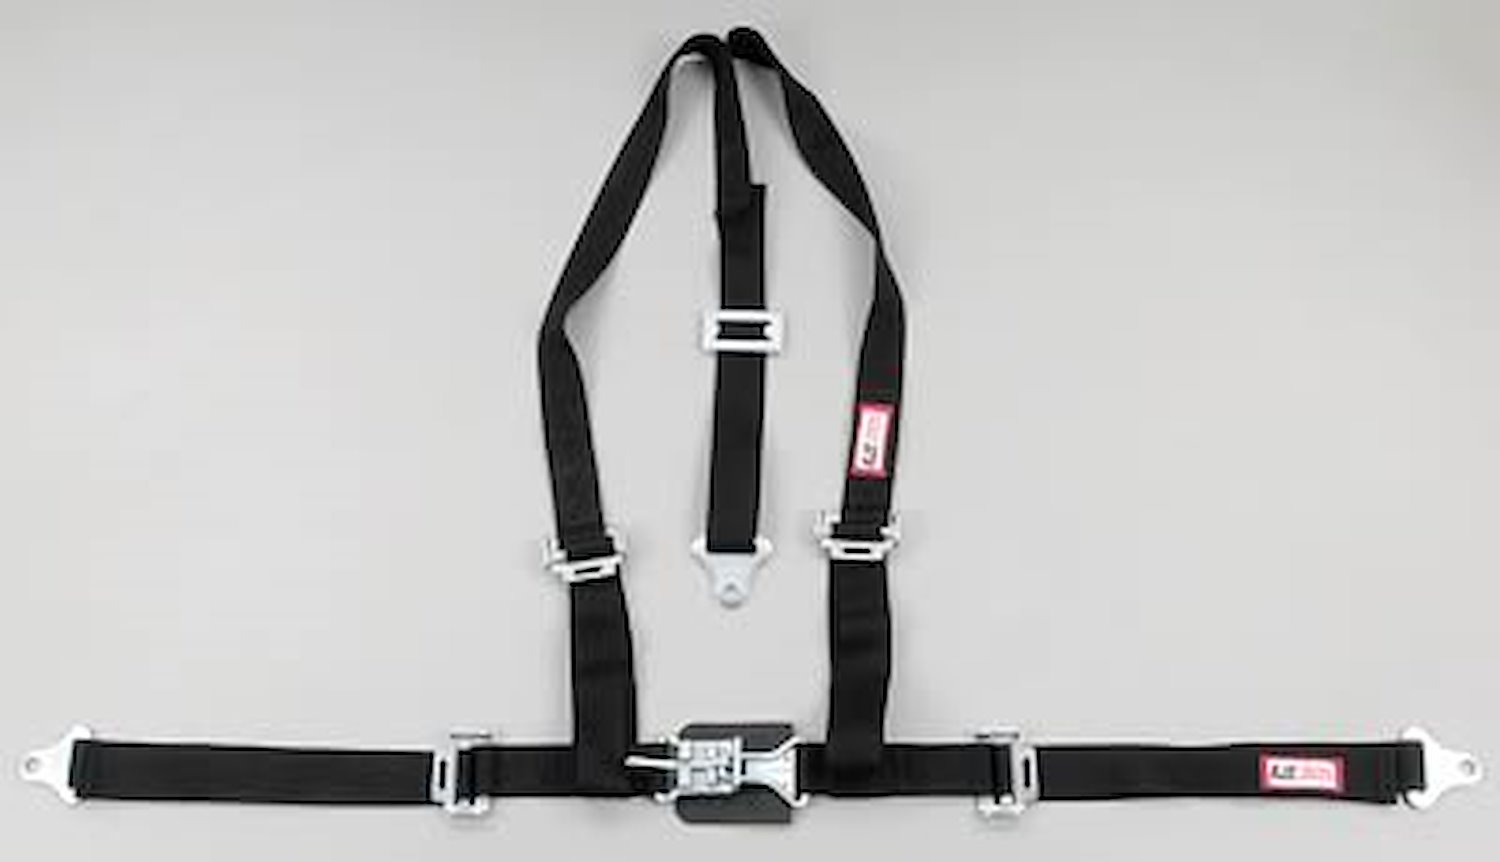 NON-SFI L&L HARNESS 3 PULL UP Lap Belt SNAP SEWN IN 2 S.H. Individual ROLL BAR Mount w/STERNUM STRAP WRAP/BOLT RED